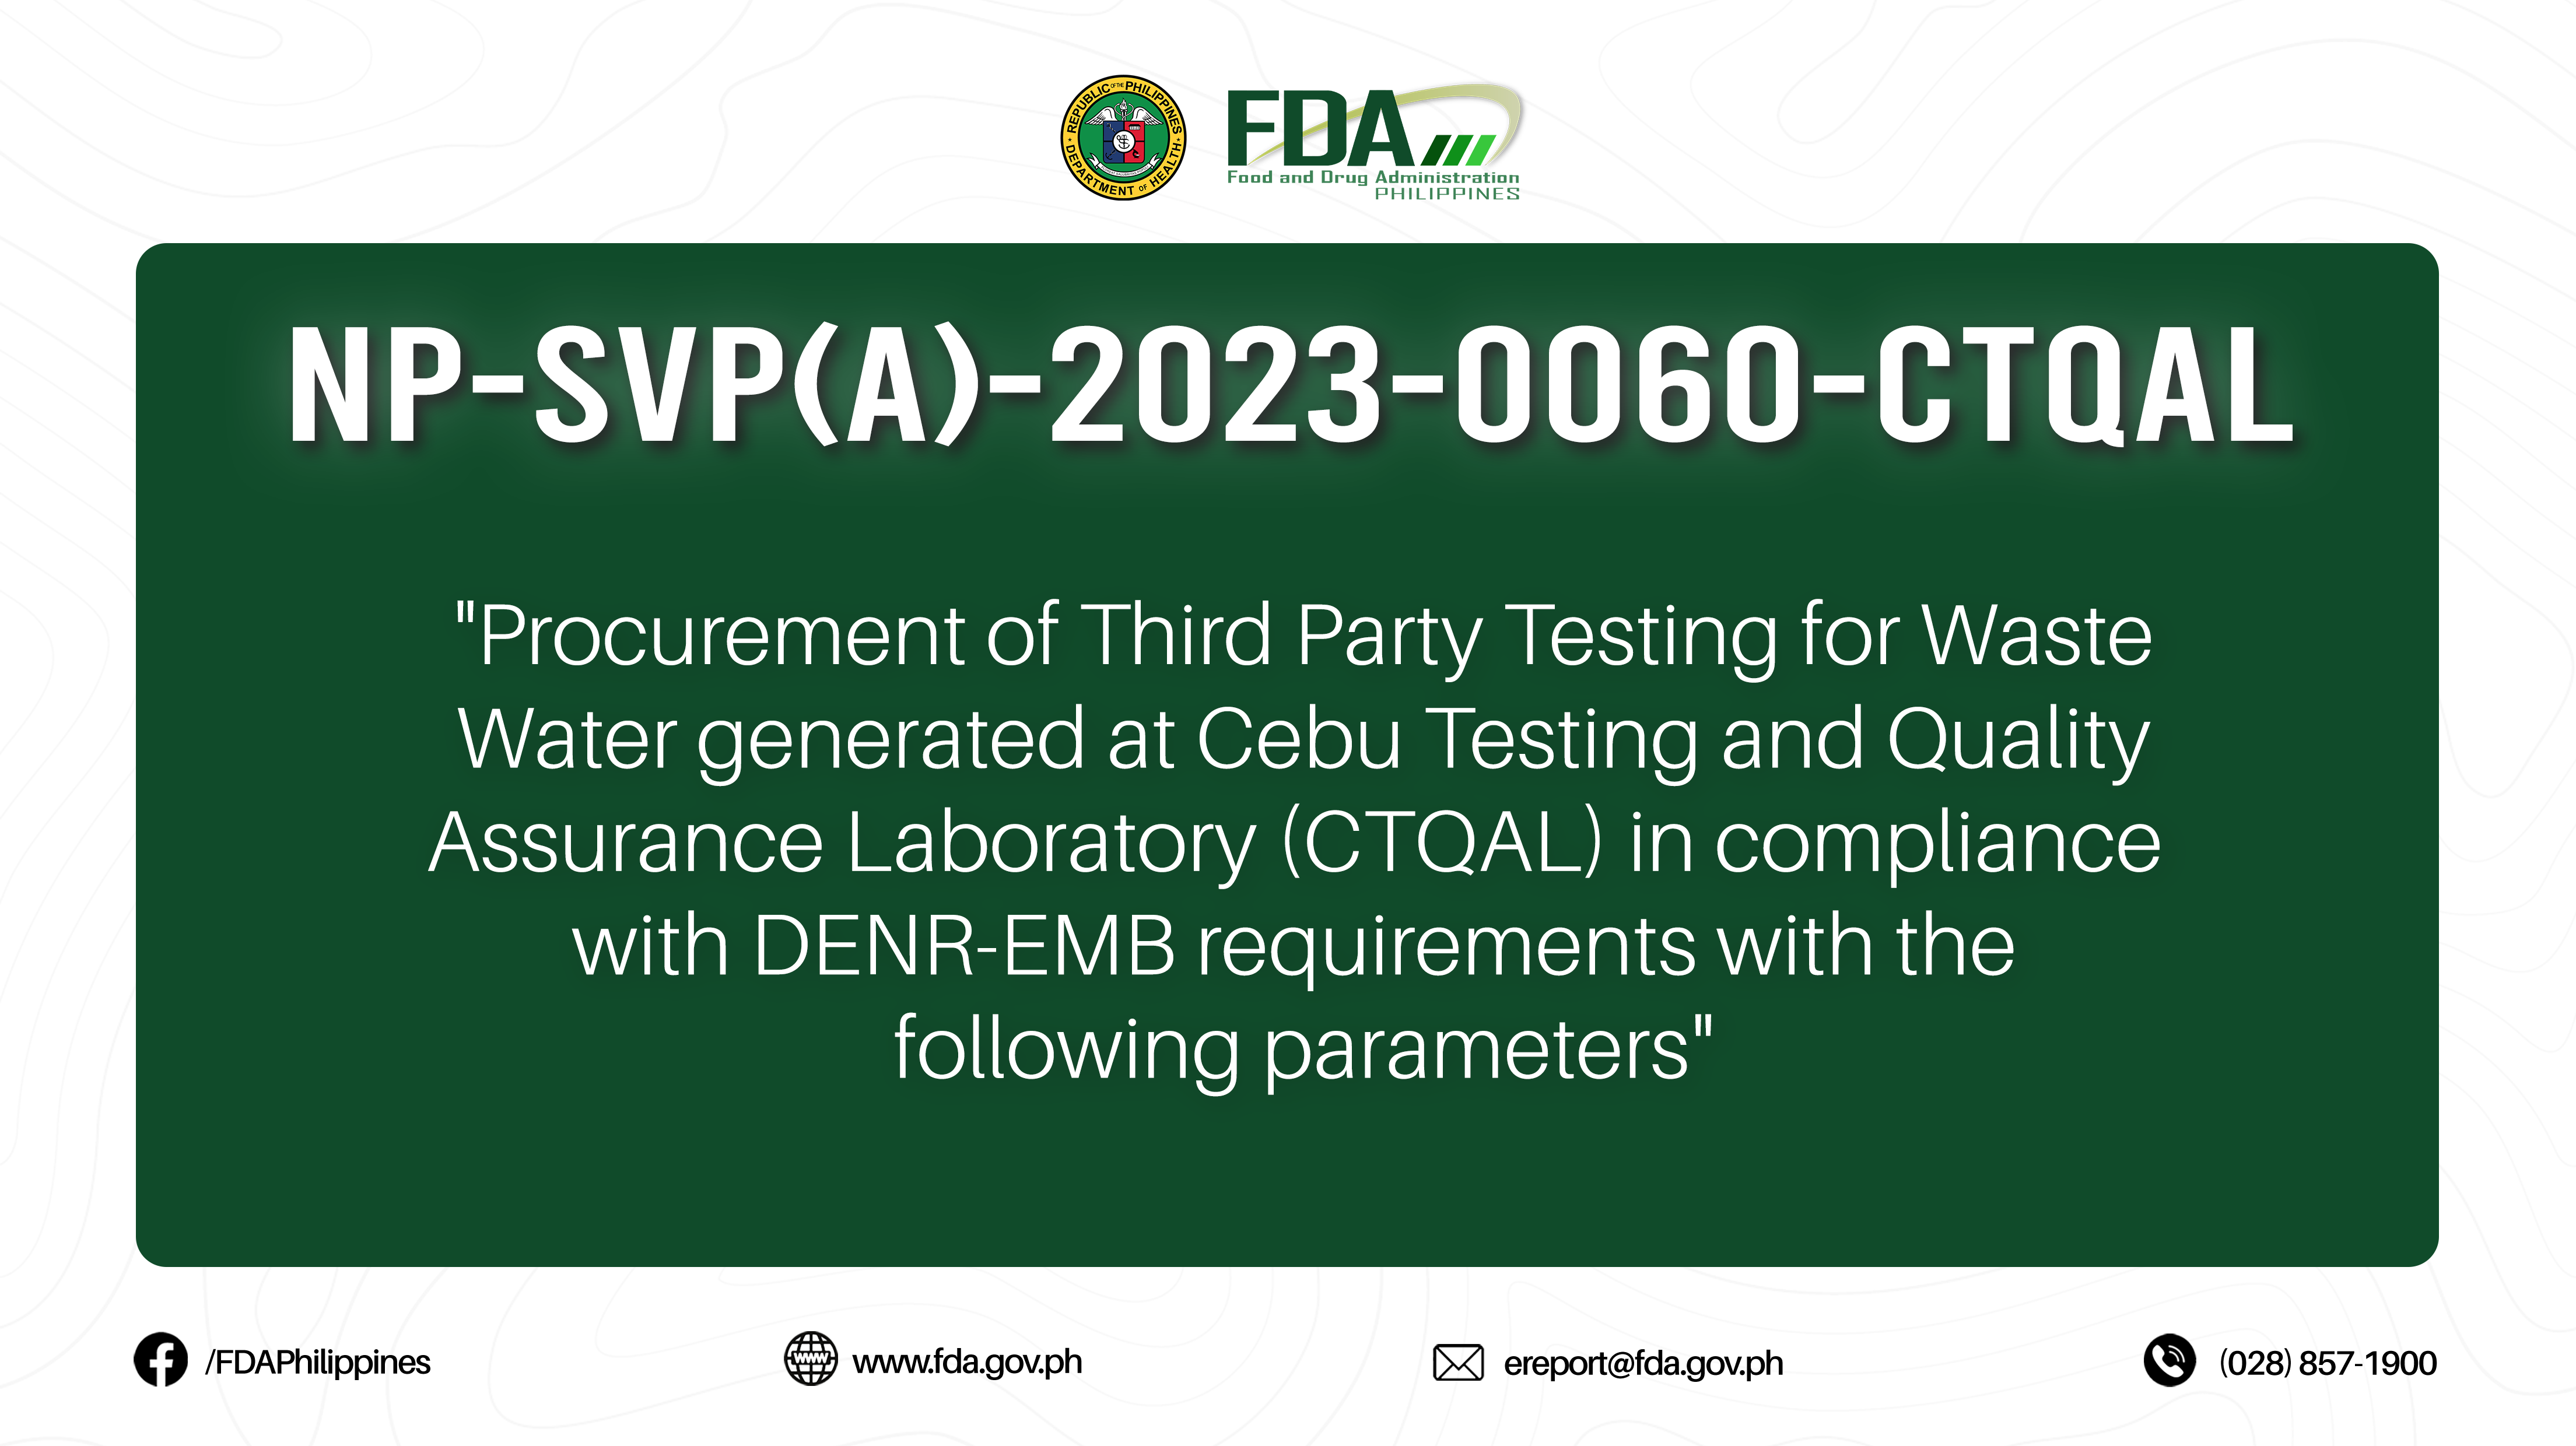 NP-SVP(A)-2023-0060-CTQAL || “Procurement of Third Party Testing for Waste  Water generated at Cebu Testing and Quality  Assurance Laboratory (CTQAL) in compliance  with DENR-EMB requirements with the  following parameters”